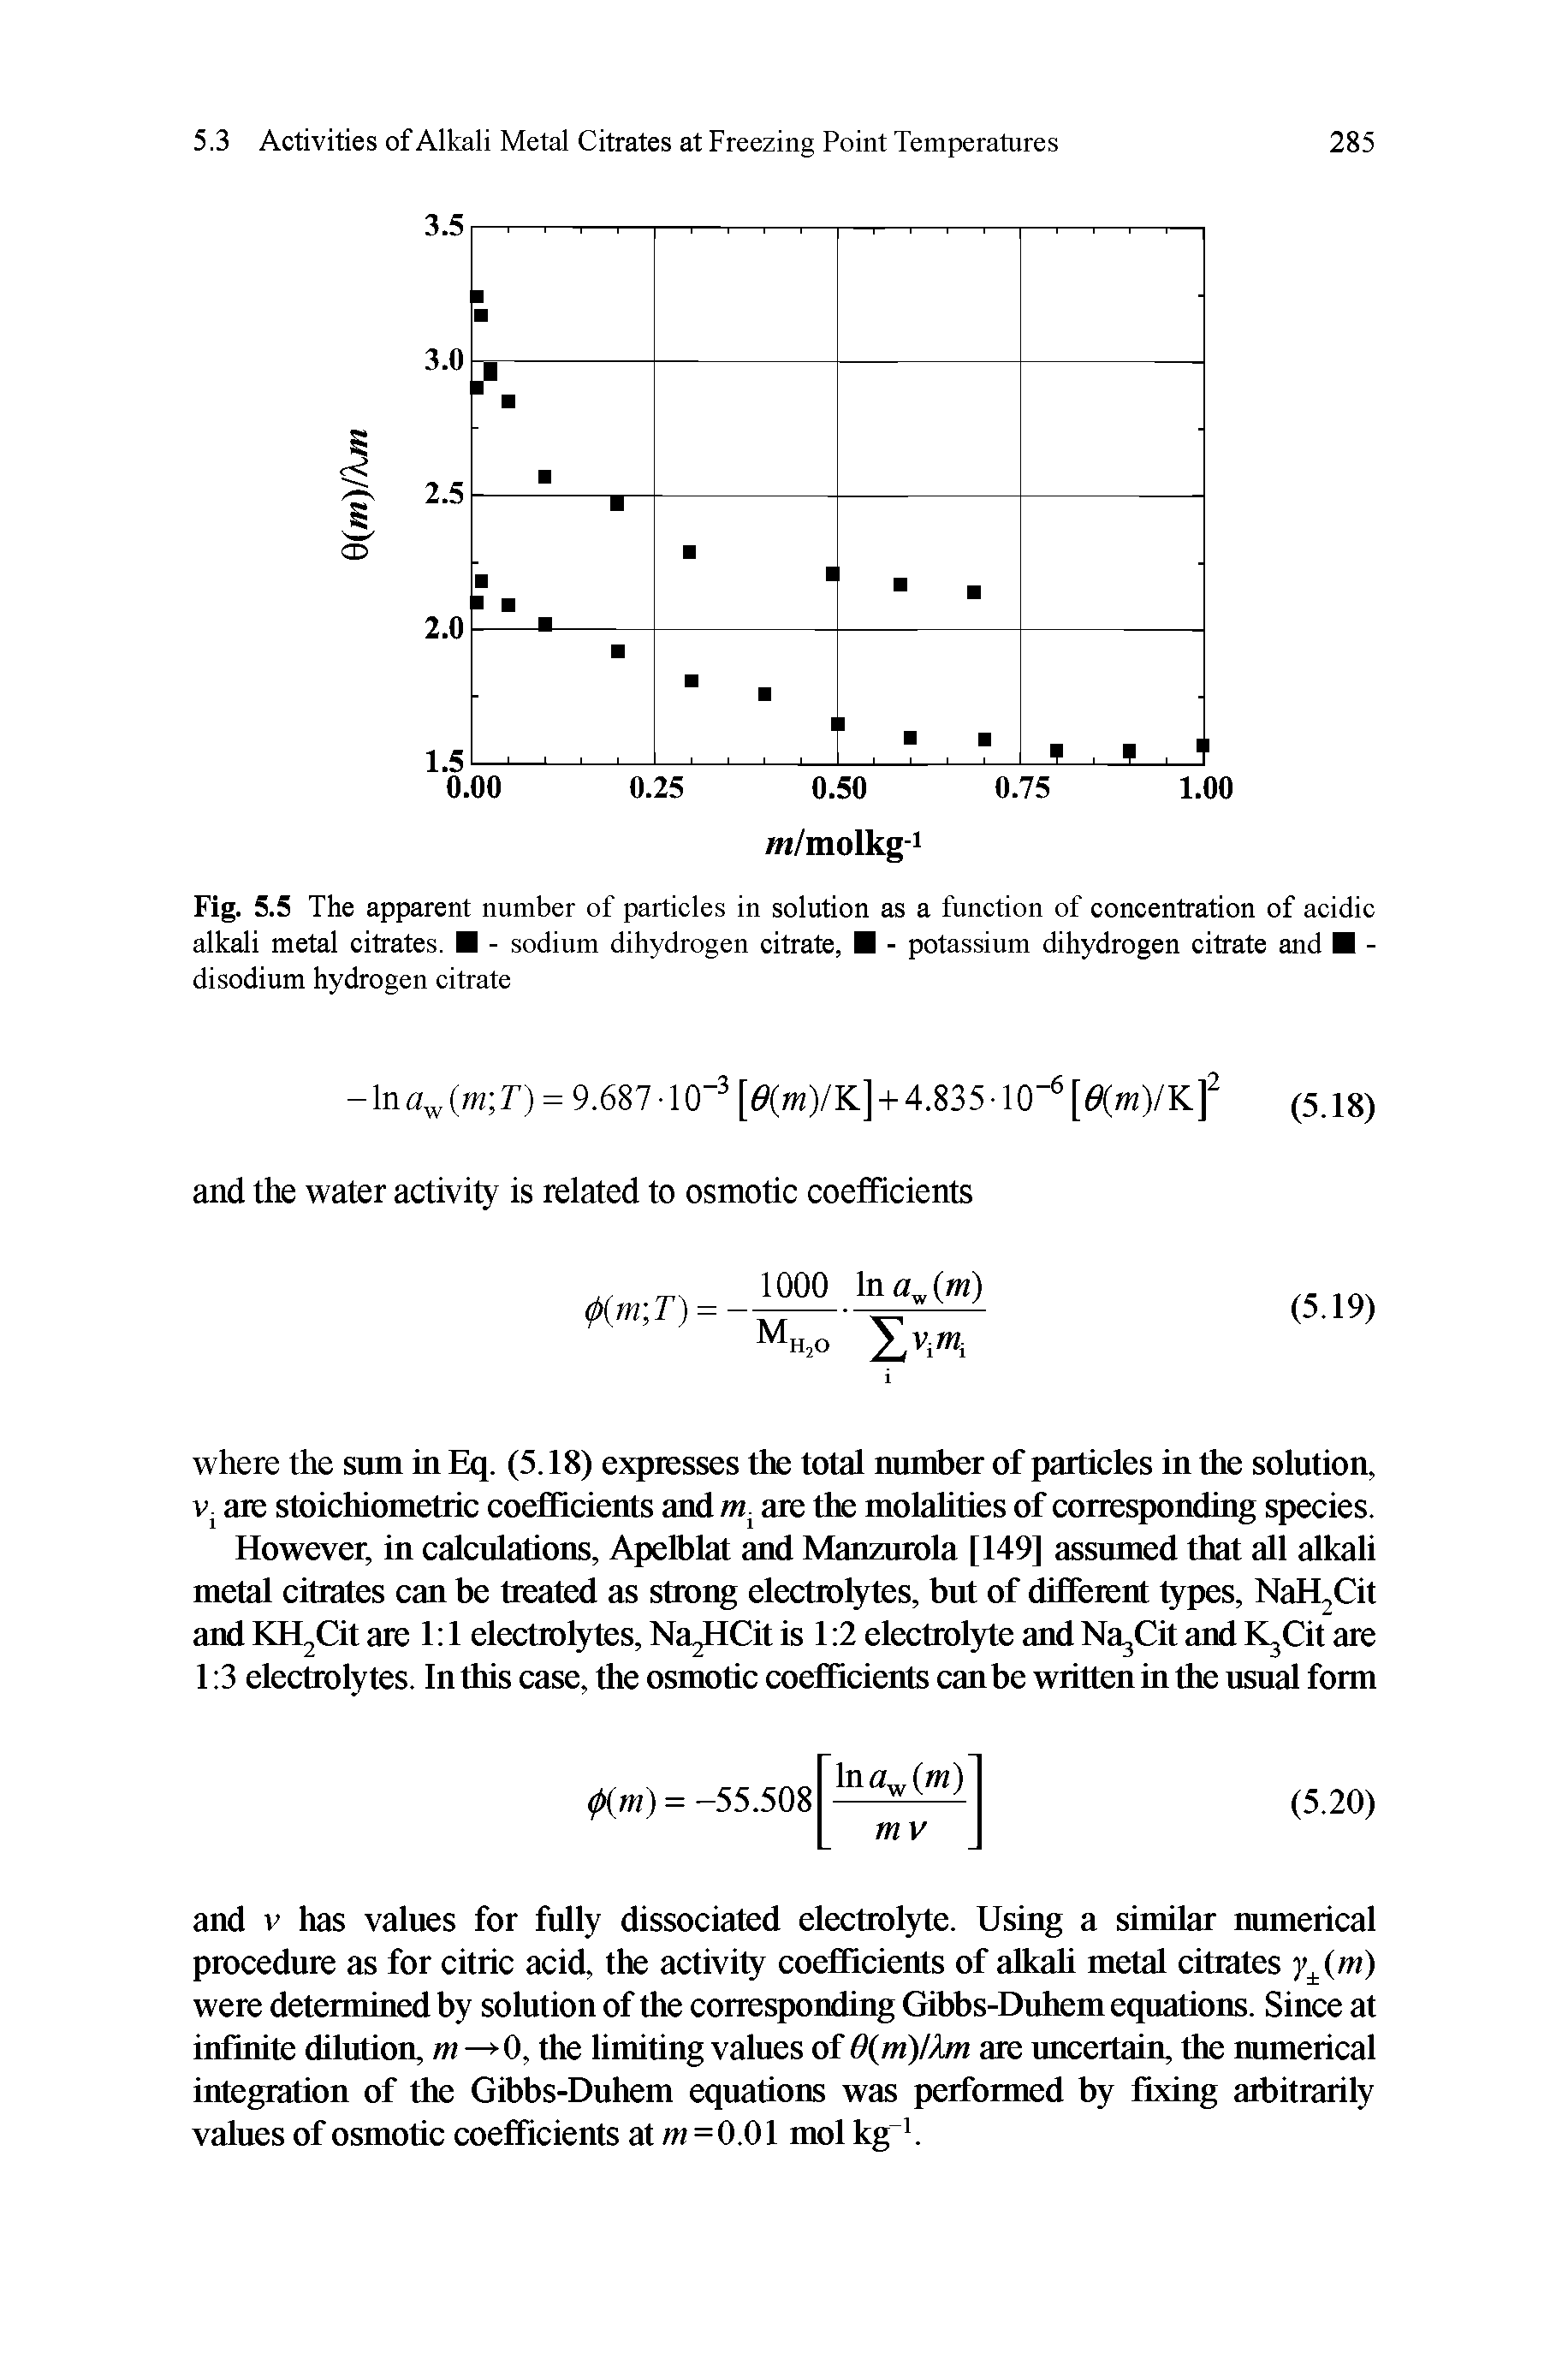 Fig. 5.5 The apparent number of particles in solution as a function of concentration of acidic alkali metal eitrates. - sodium dihydrogen citrate, - potassium dihydrogen citrate and -disodium hydrogen citrate...